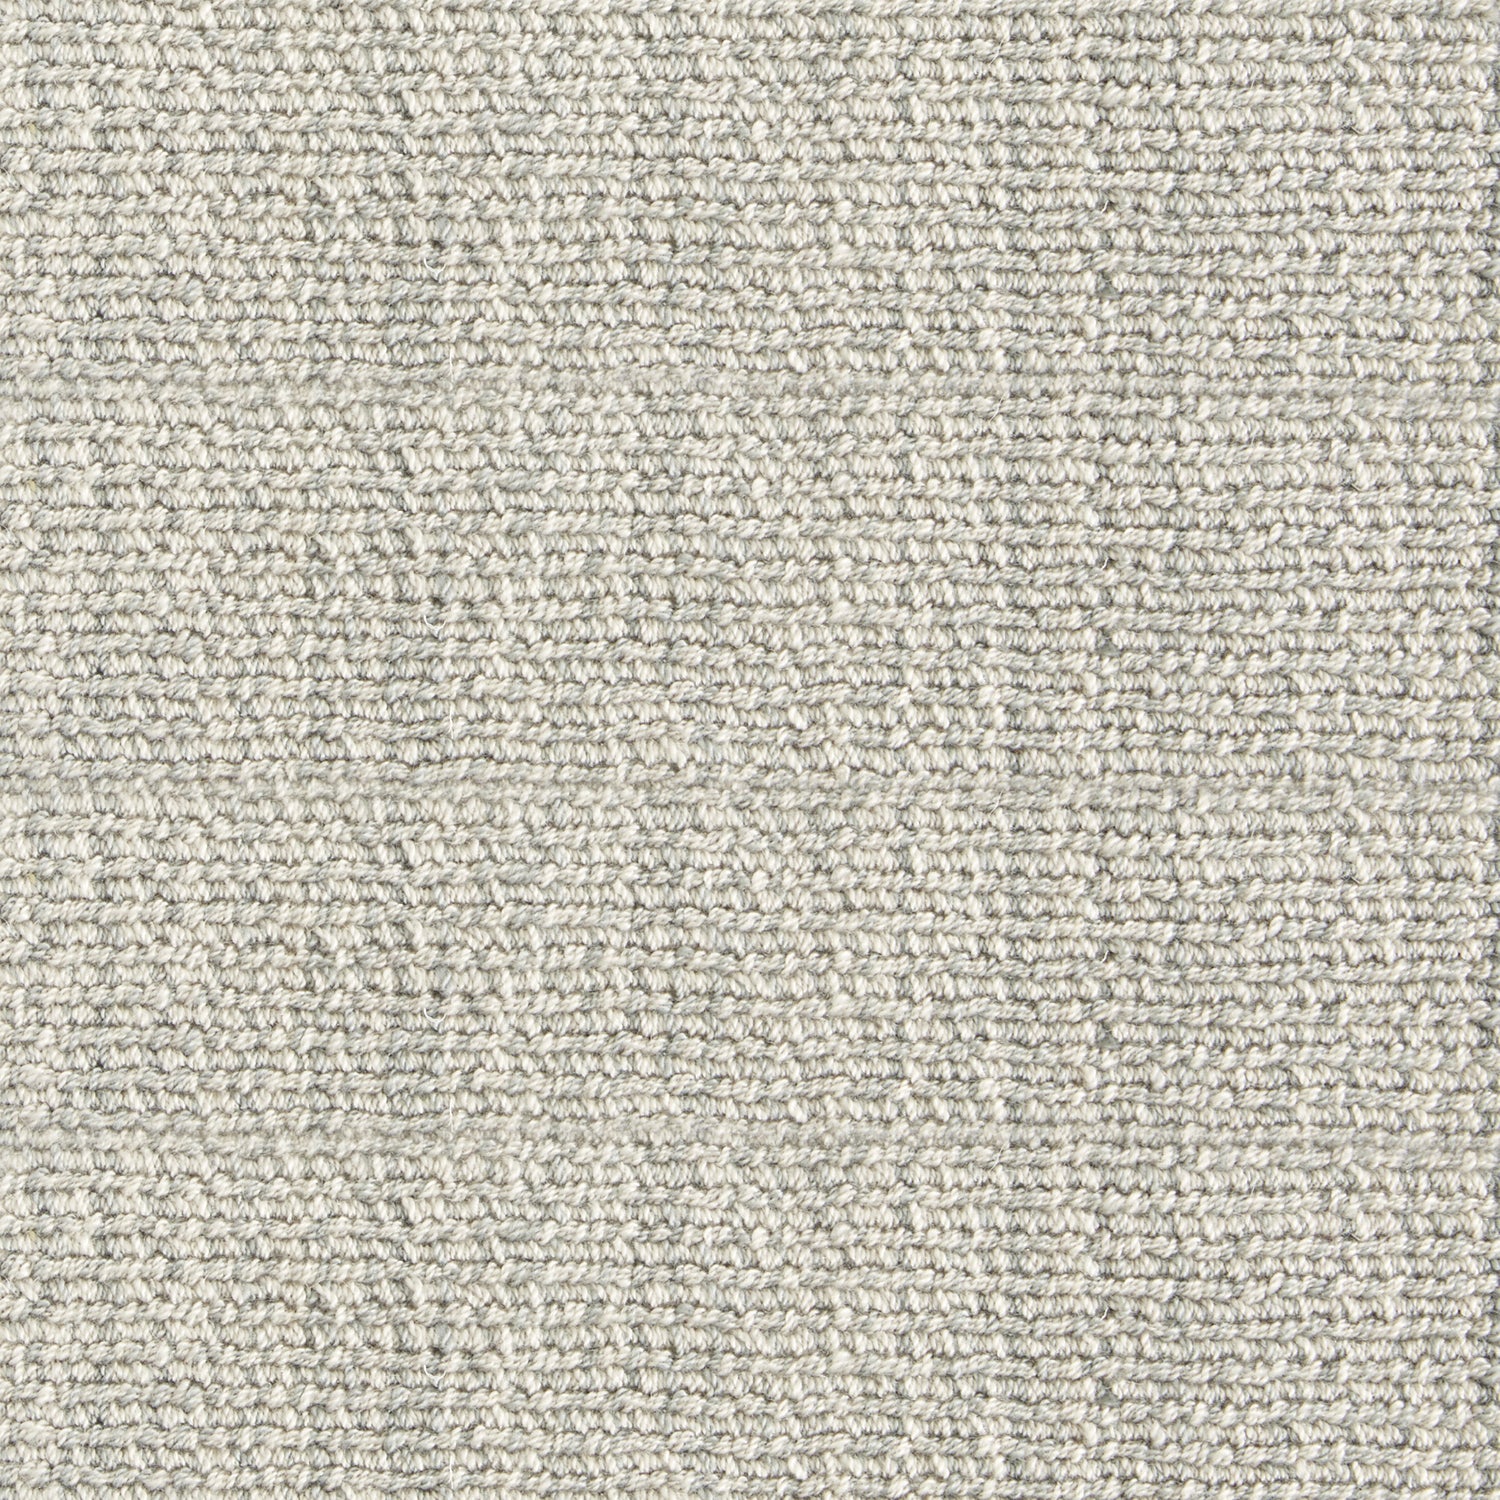 Nylon broadloom carpet swatch in a ribbed weave in mottled cream and sage.